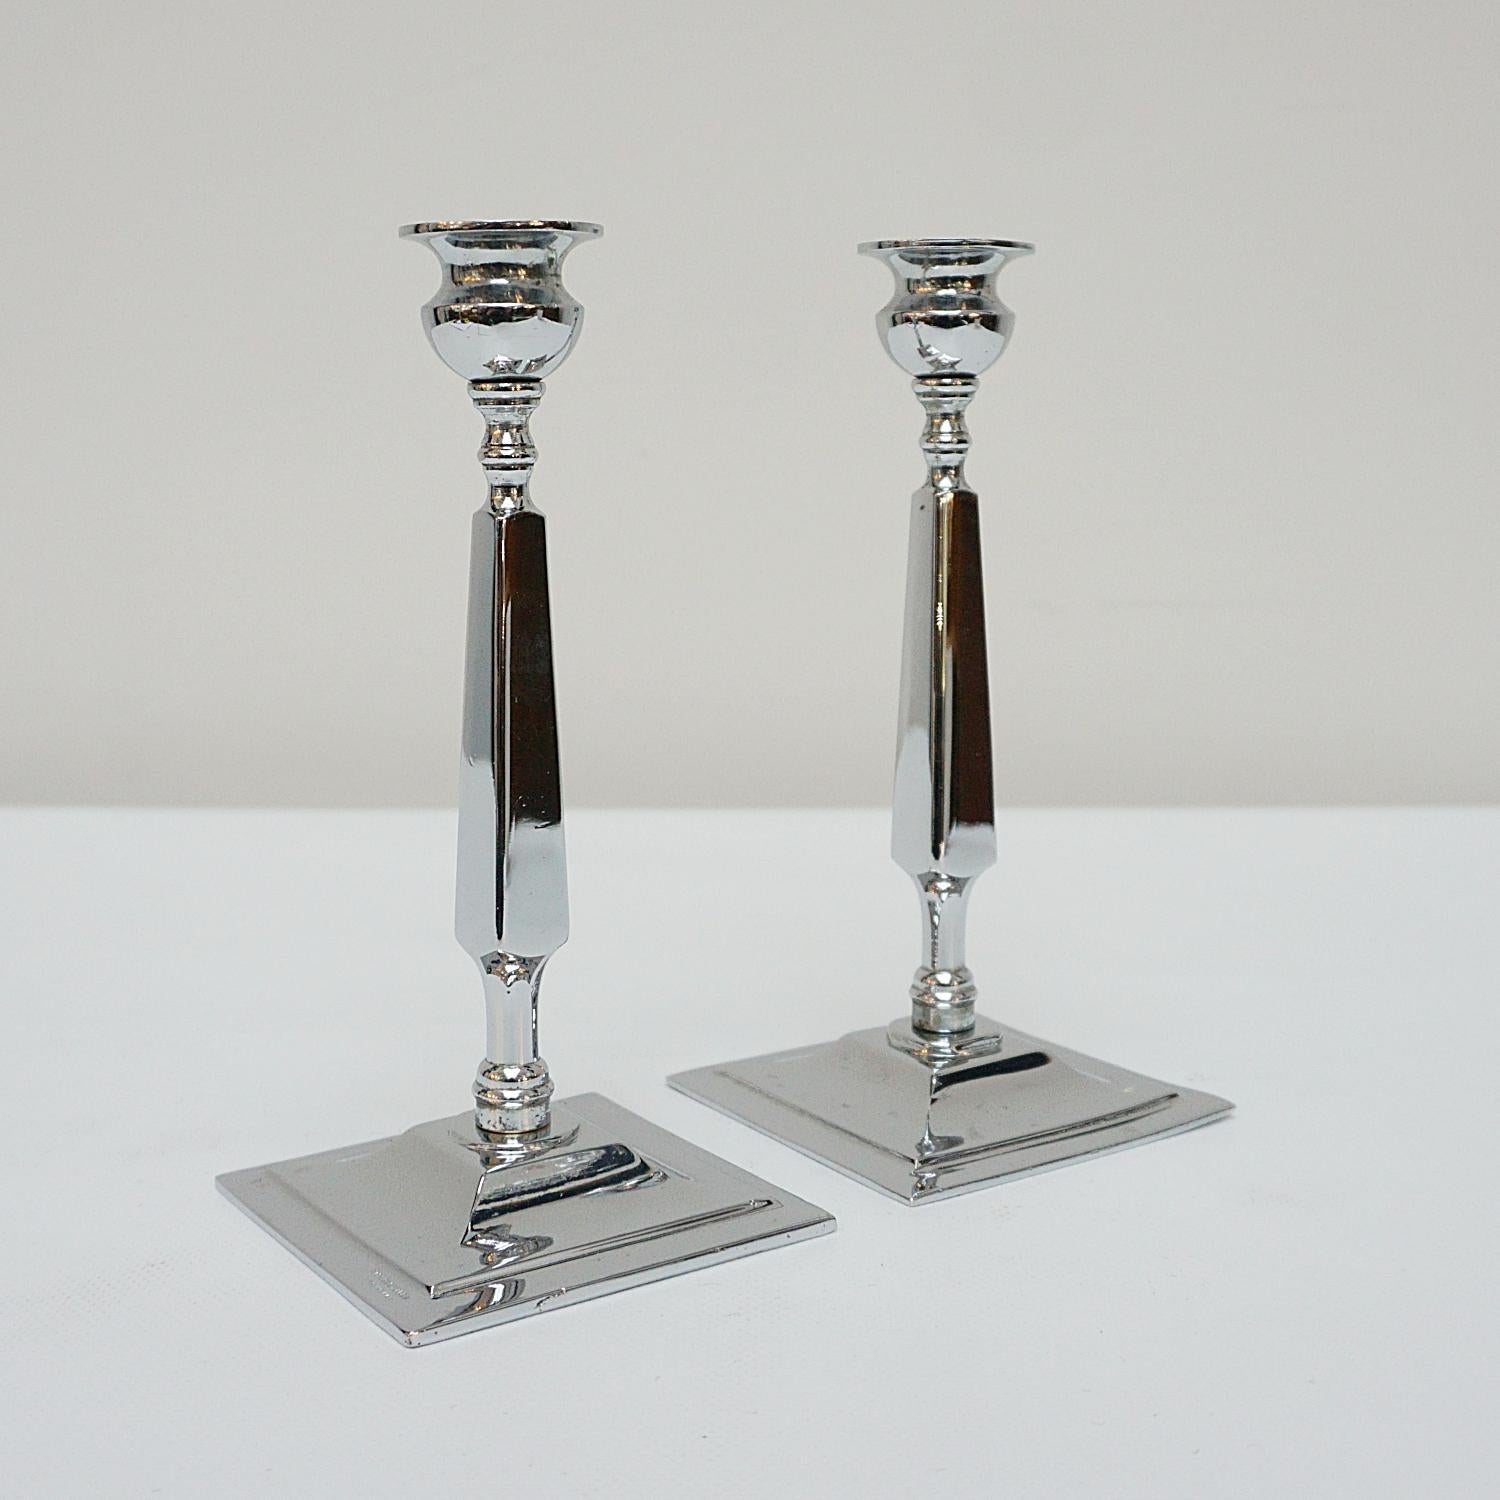 A pair of Art Deco candlesticks. Chromed squared stem. Set over a square, stepped chromed metal base with chromed metal top. 

Dimensions: H 20cm W 9cm

Origin: English

Date: Circa 1935

Item Number: 2710237

Re-chromed and polished with some